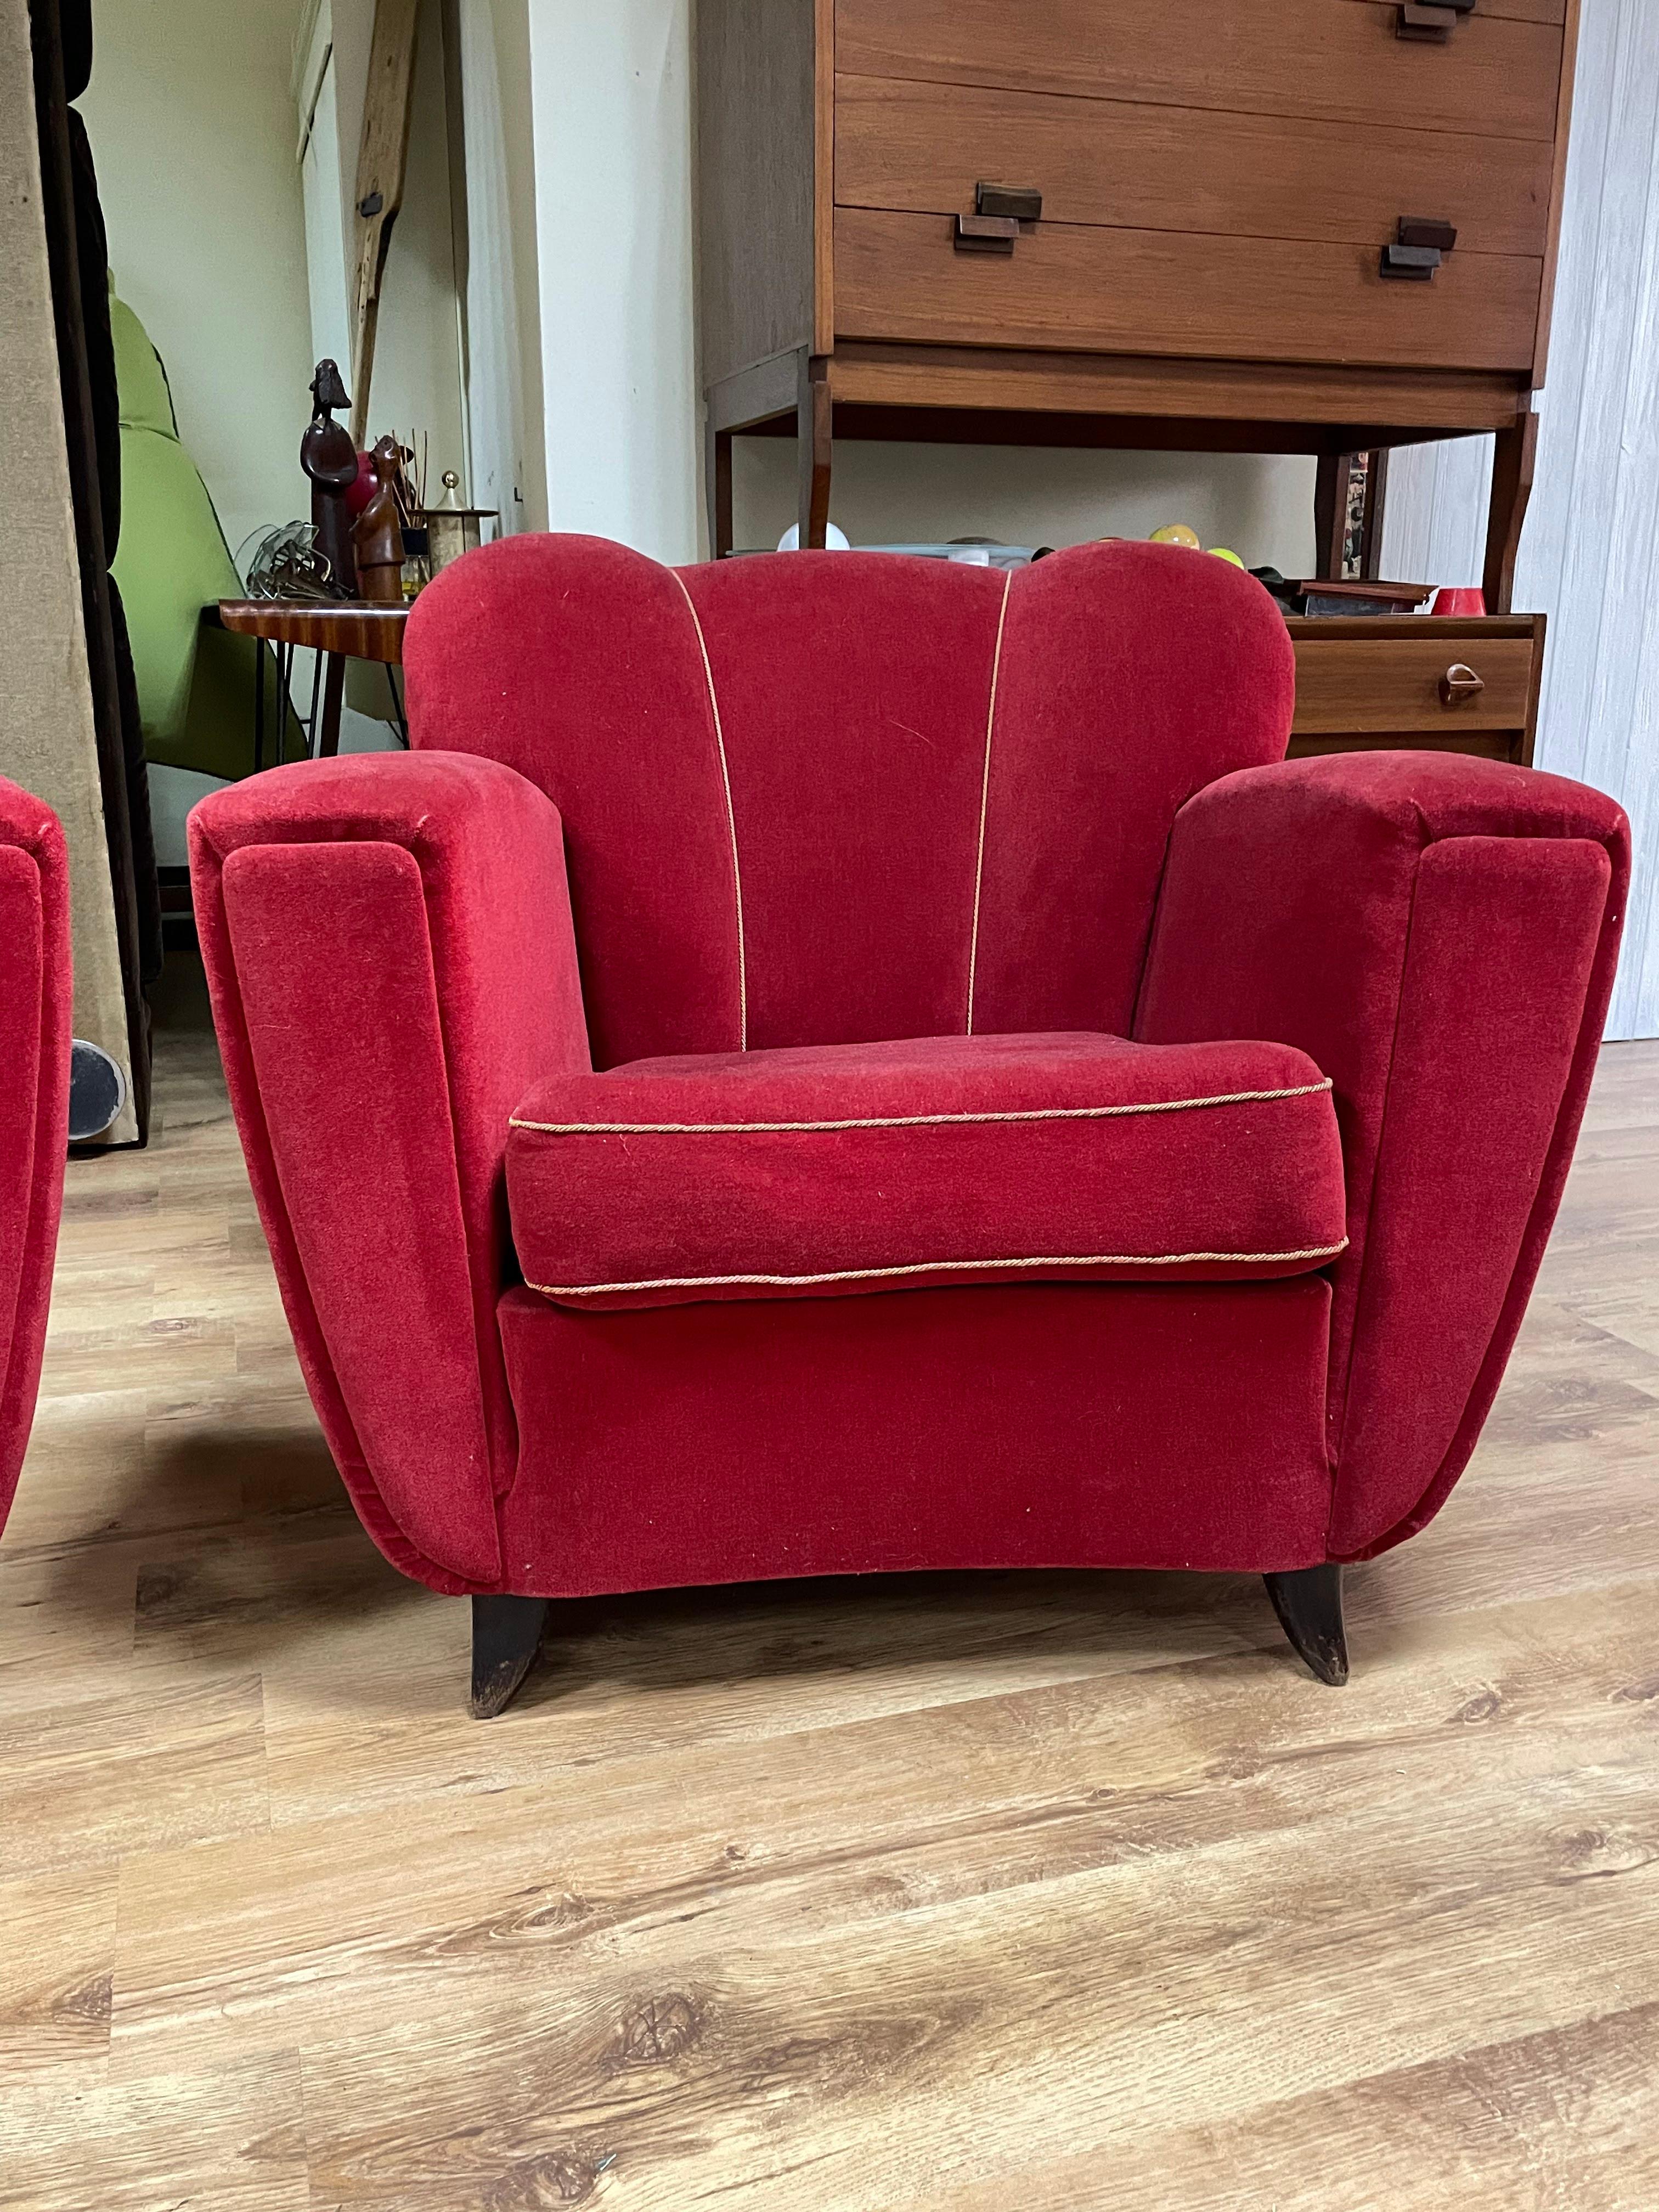 Mid-20th Century Set of 2 Armchairs in Red Velvet, 1940s